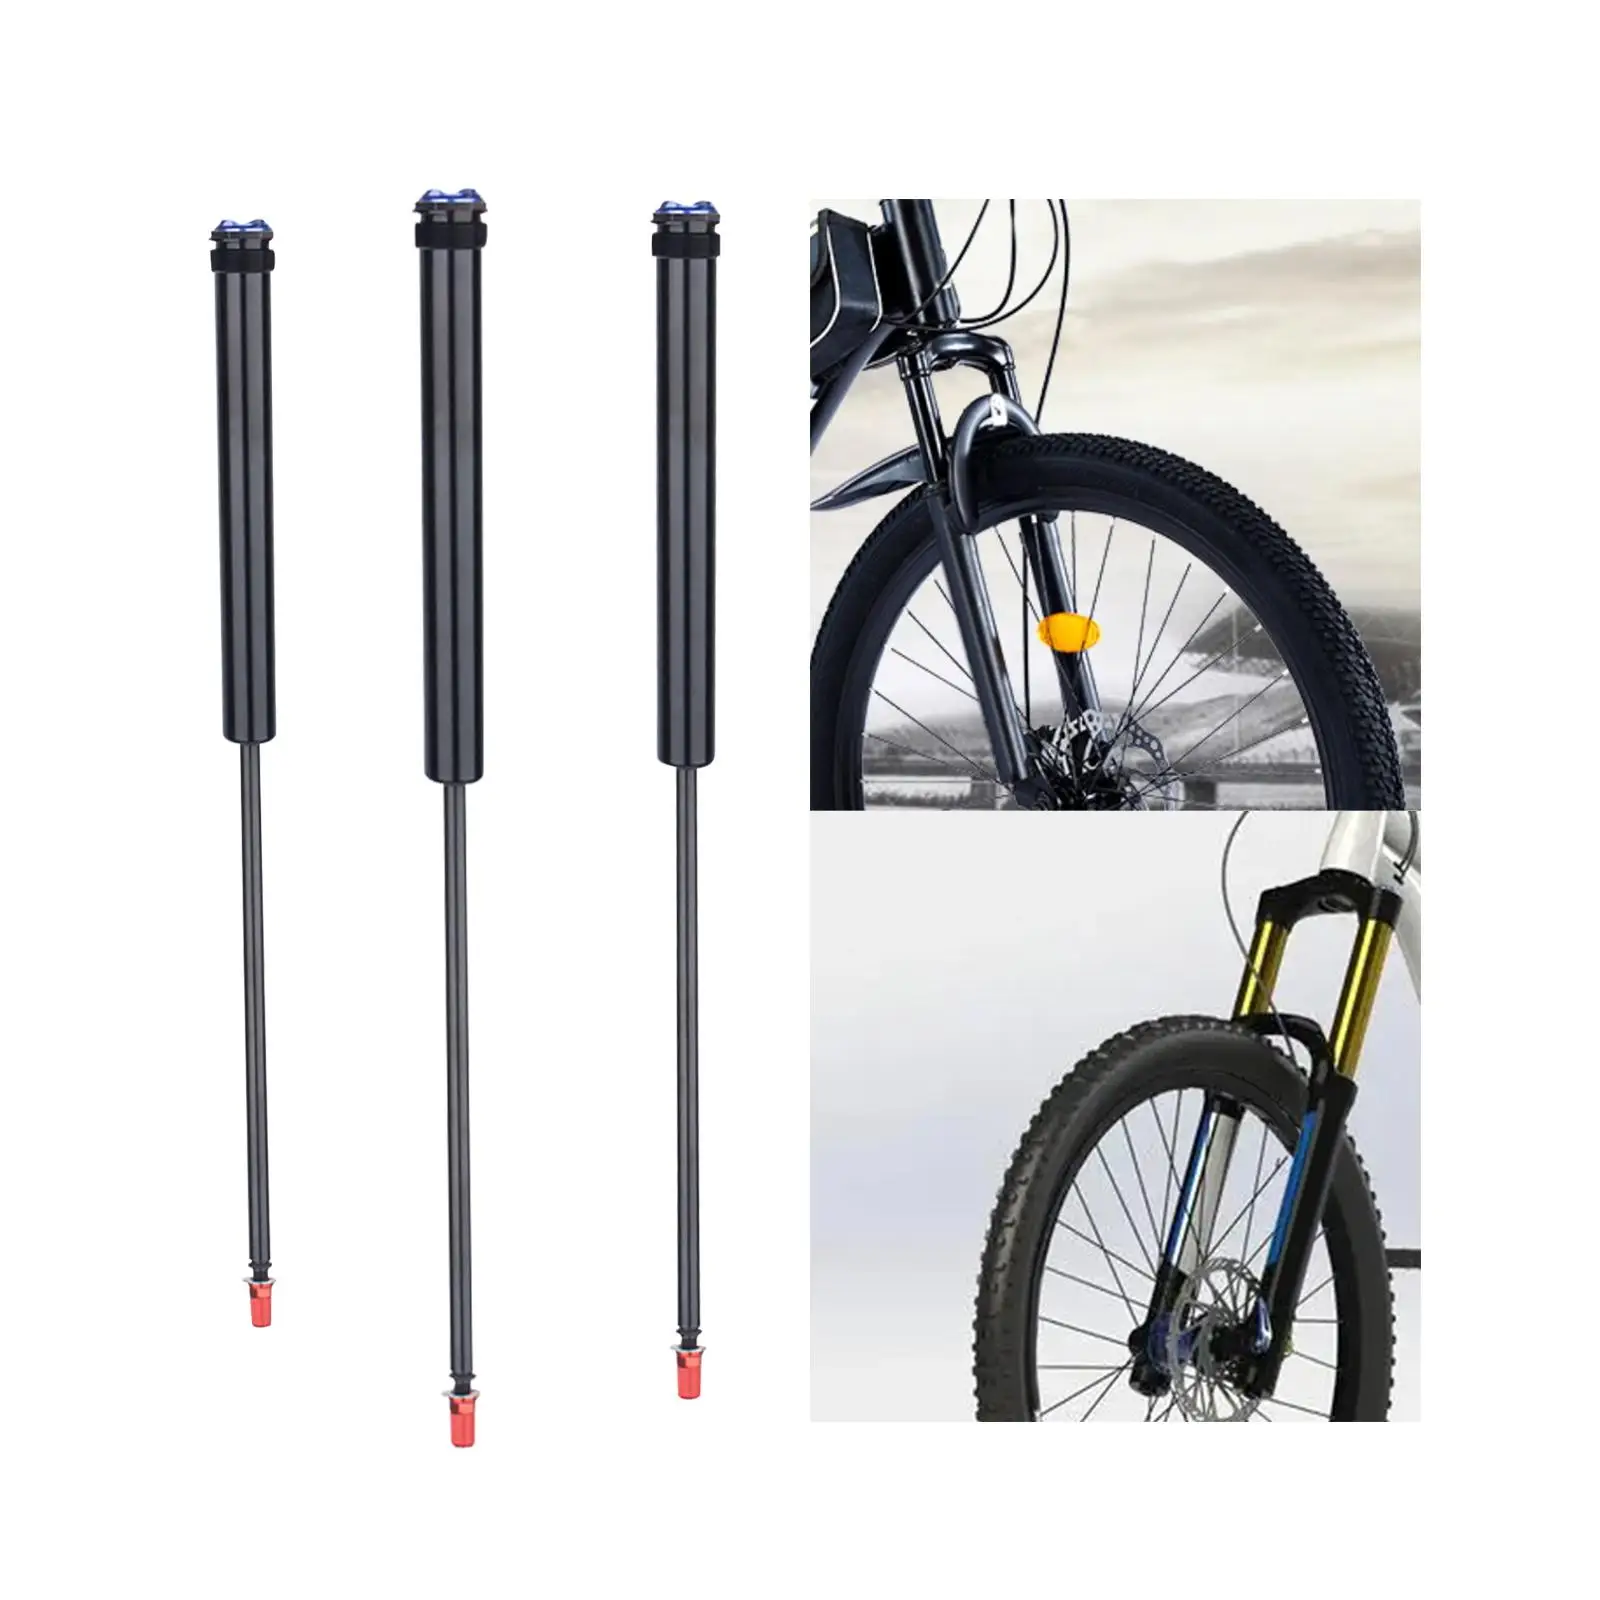 Damping Rod Shoulder Control Replacement Bike Front Fork Repair Rod for Most Mountain Bikes Sturdy